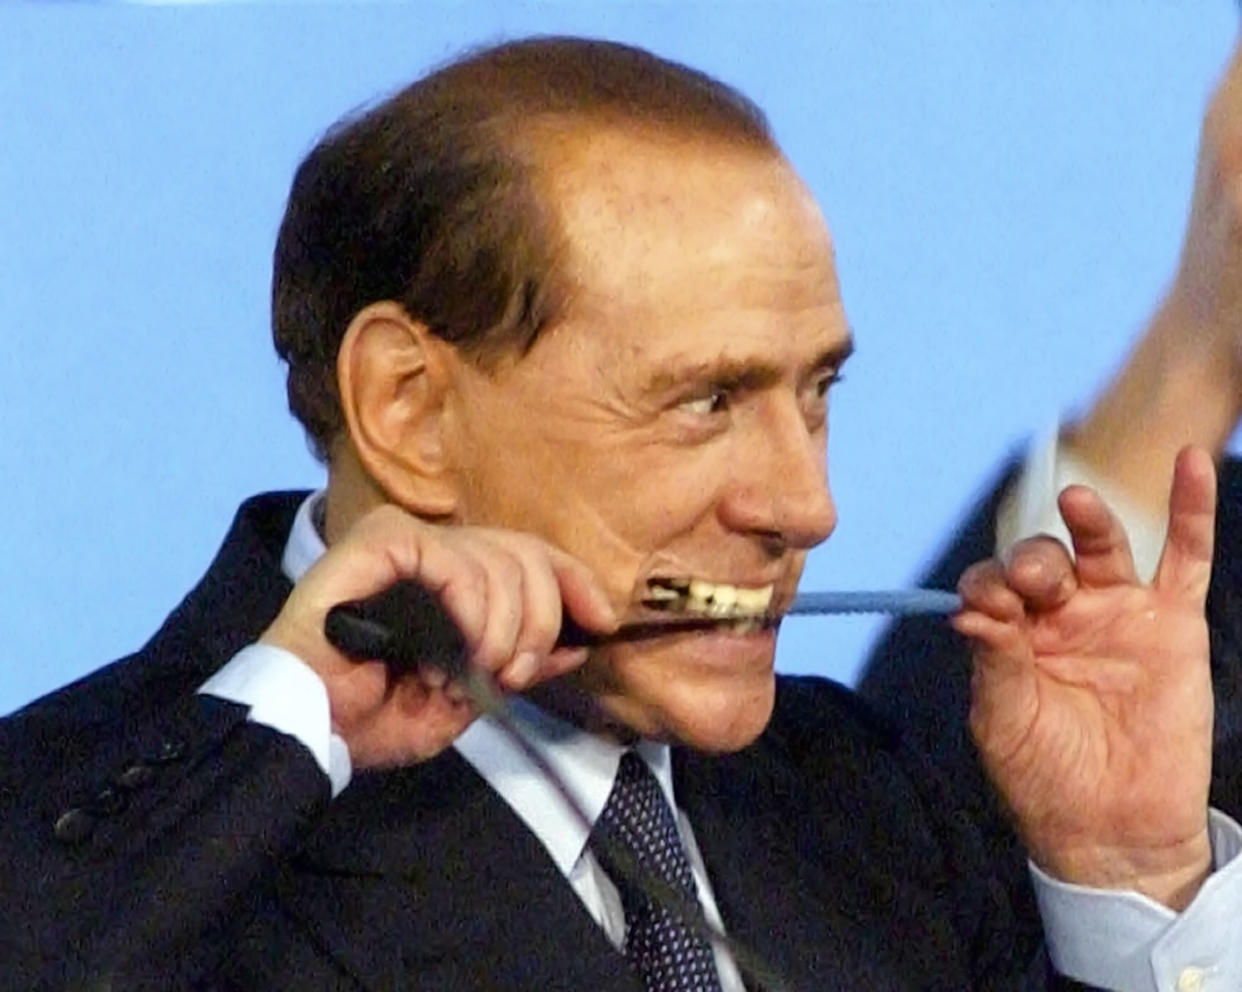 FILE - Italian Premier Silvio Berlusconi plays the pirate with a knife before cutting a cake at the "No Tax Day" meeting organized by Forza Italia (Go Italy) party in Mestre, Italy, Saturday, Dec. 11, 2004. Italy’s former premier Silvio Berlusconi is making his return to Italy's parliament, winning a seat in the Senate nearly a decade after being banned from public office over a tax fraud conviction (AP Photo/Antonio Calanni, File)